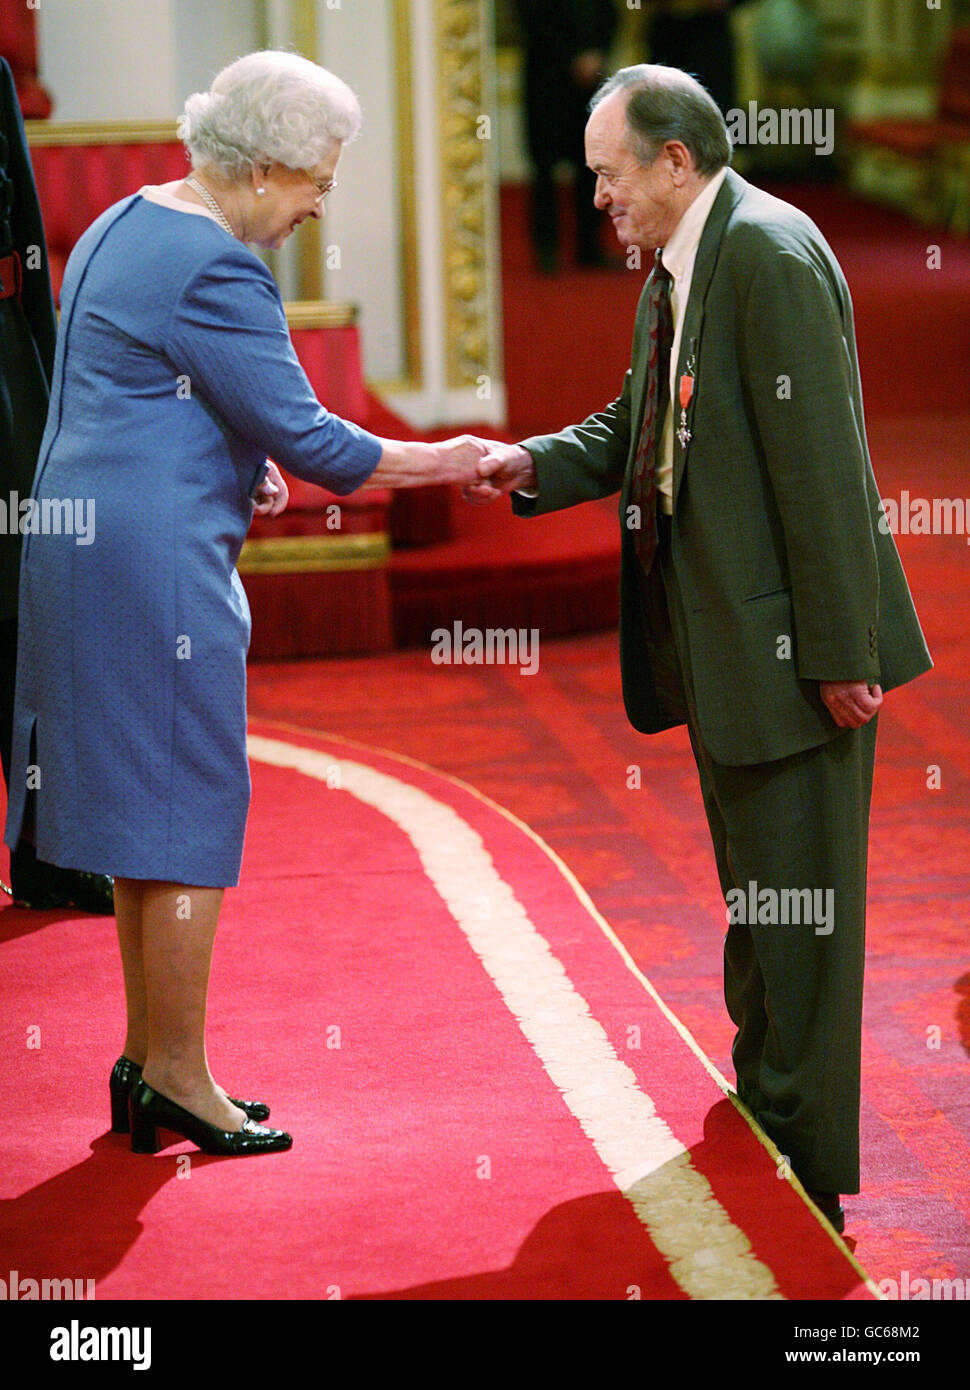 Actor James Bolam receives his MBE from The Queen at Buckingham Palace in London. Stock Photo